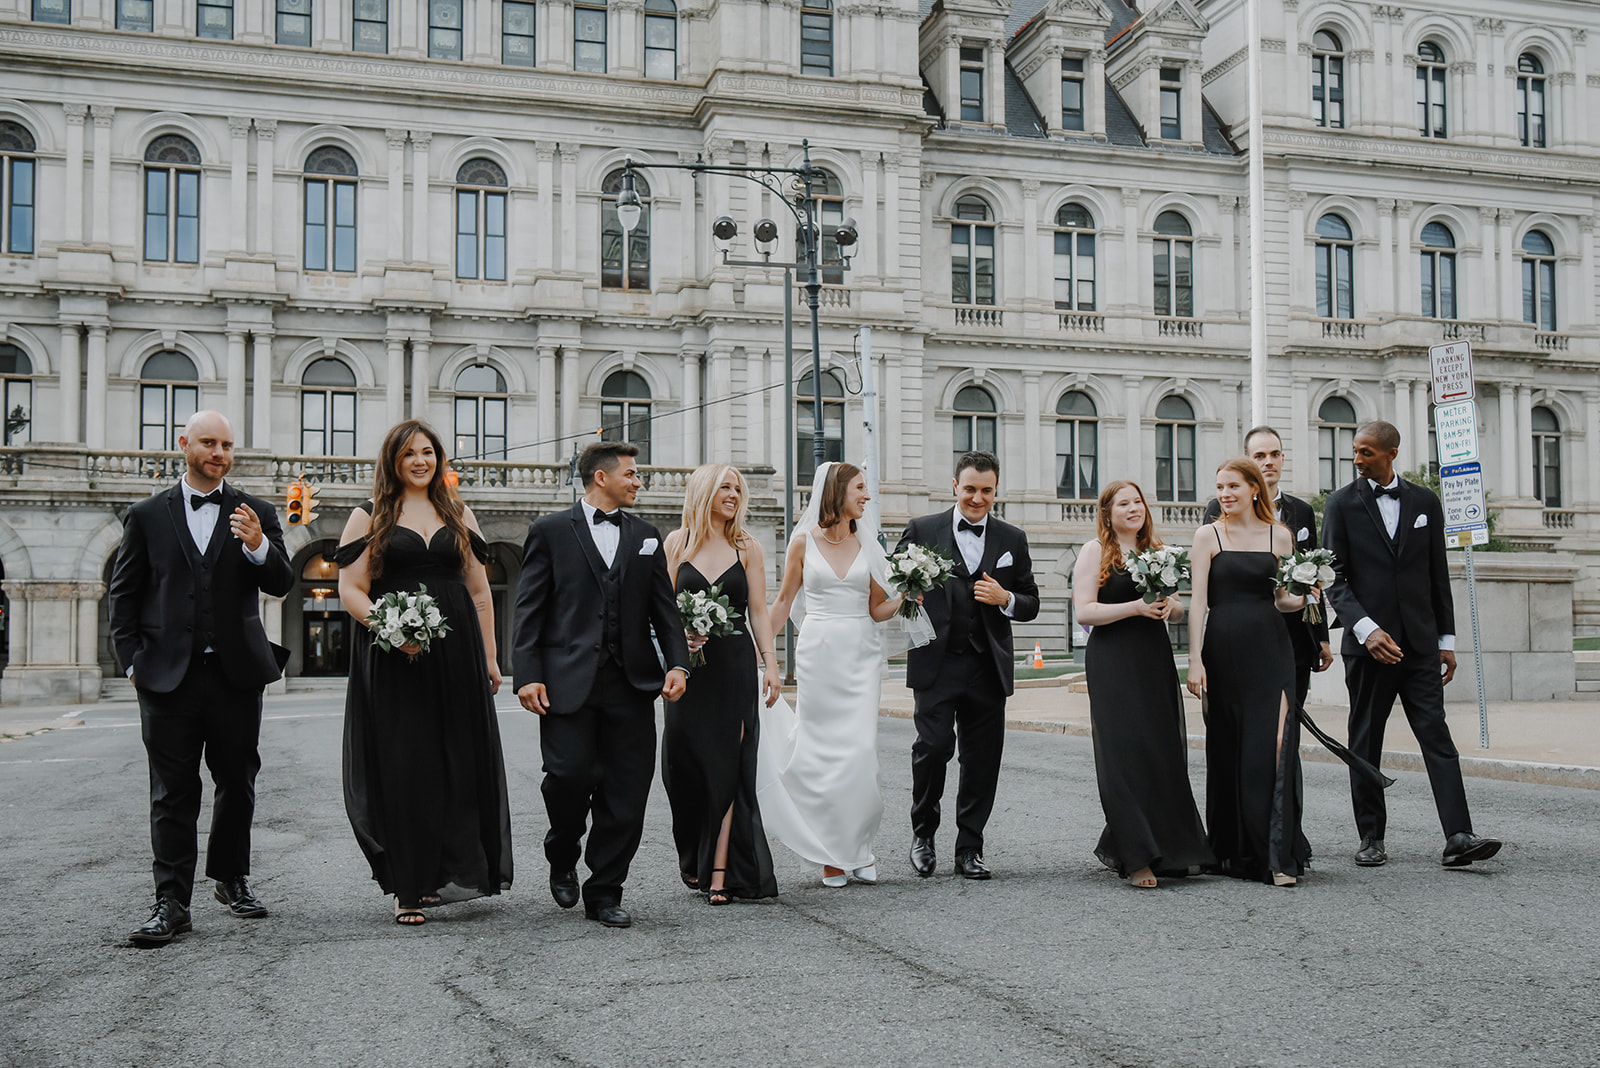 Wedding in downtown Albany New York.